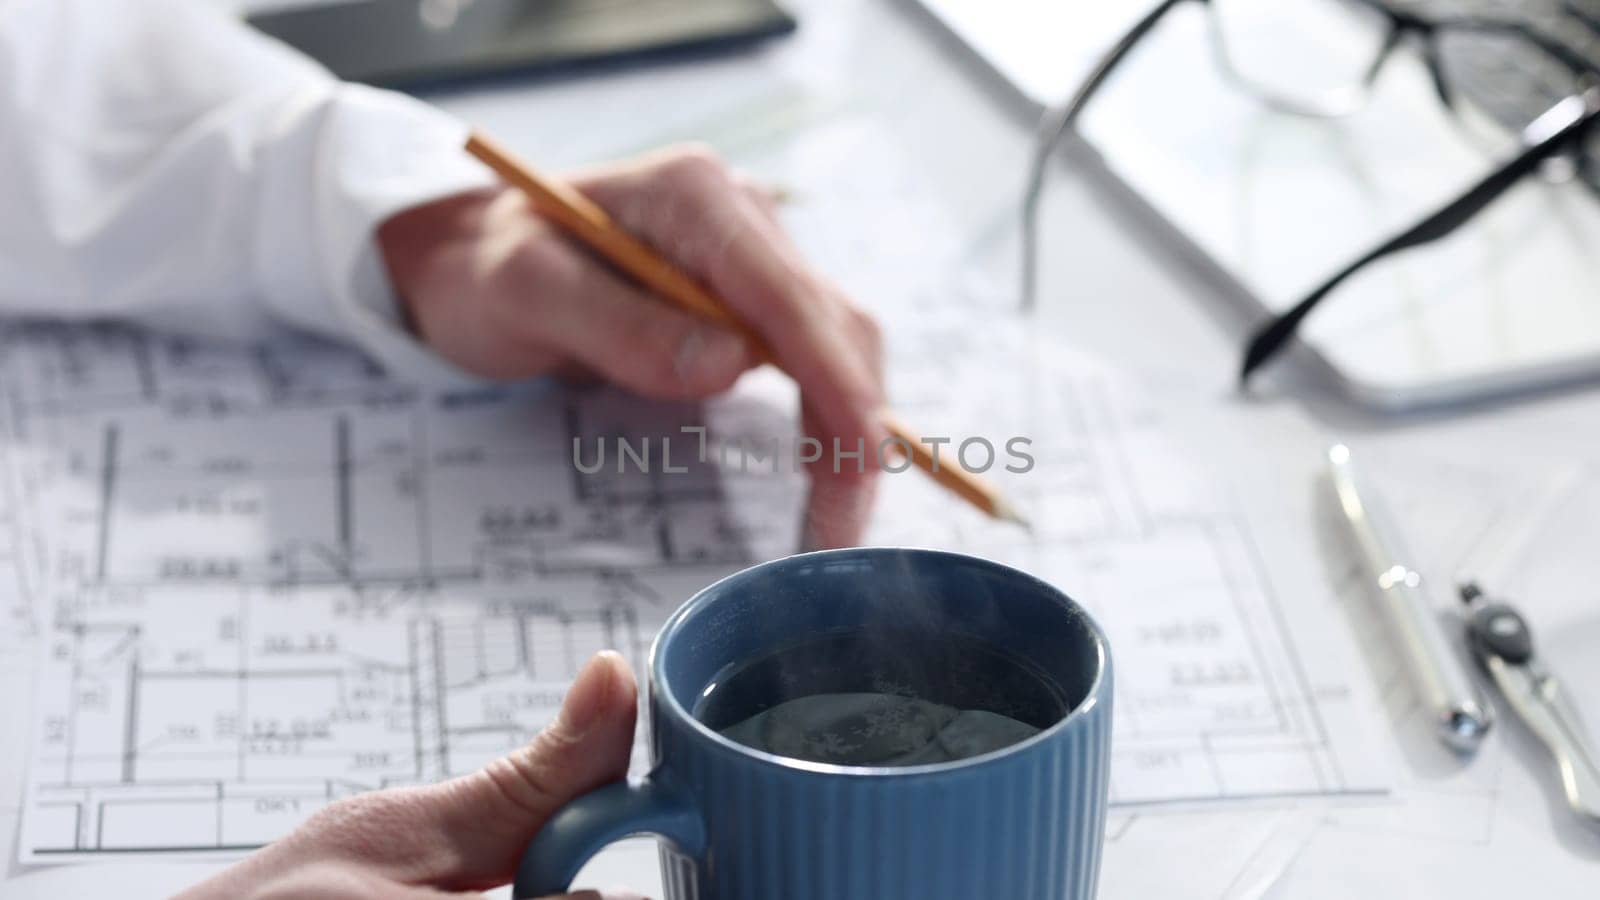 Drawing drawings and house layout with a cup of coffee by Prosto